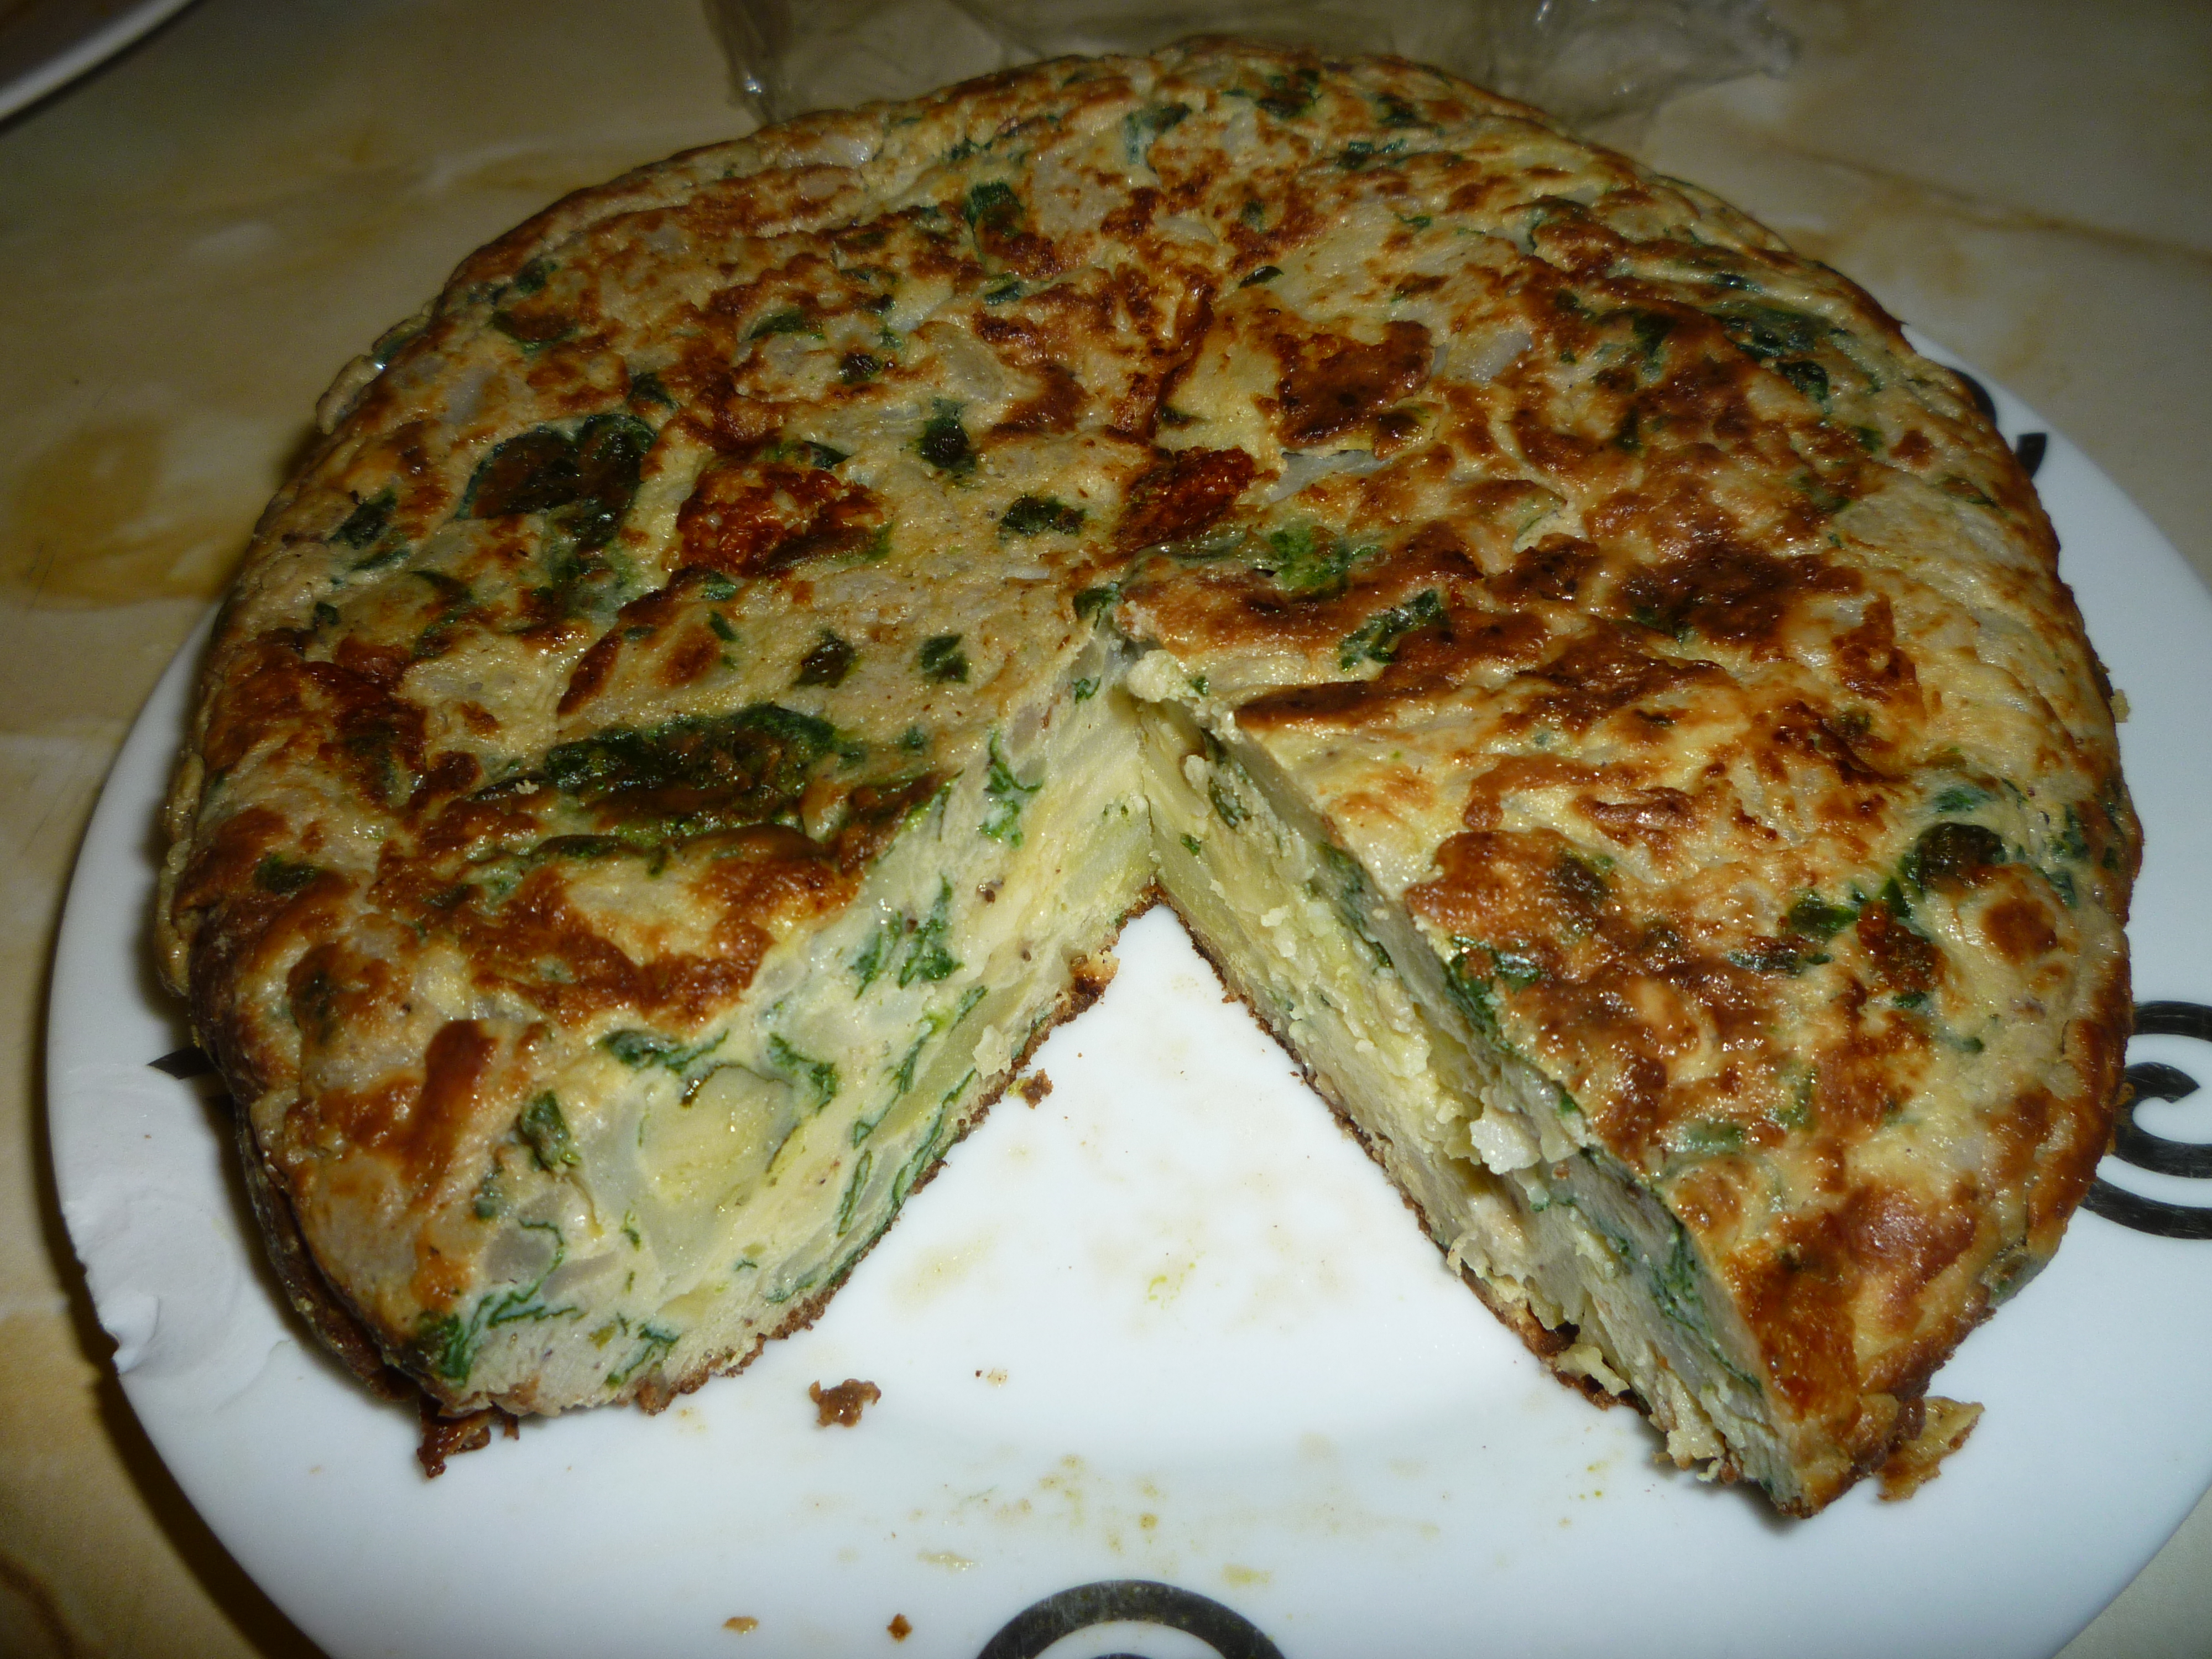 Cooking, Eating. Eating Cooking  - Potato omelette with spinach